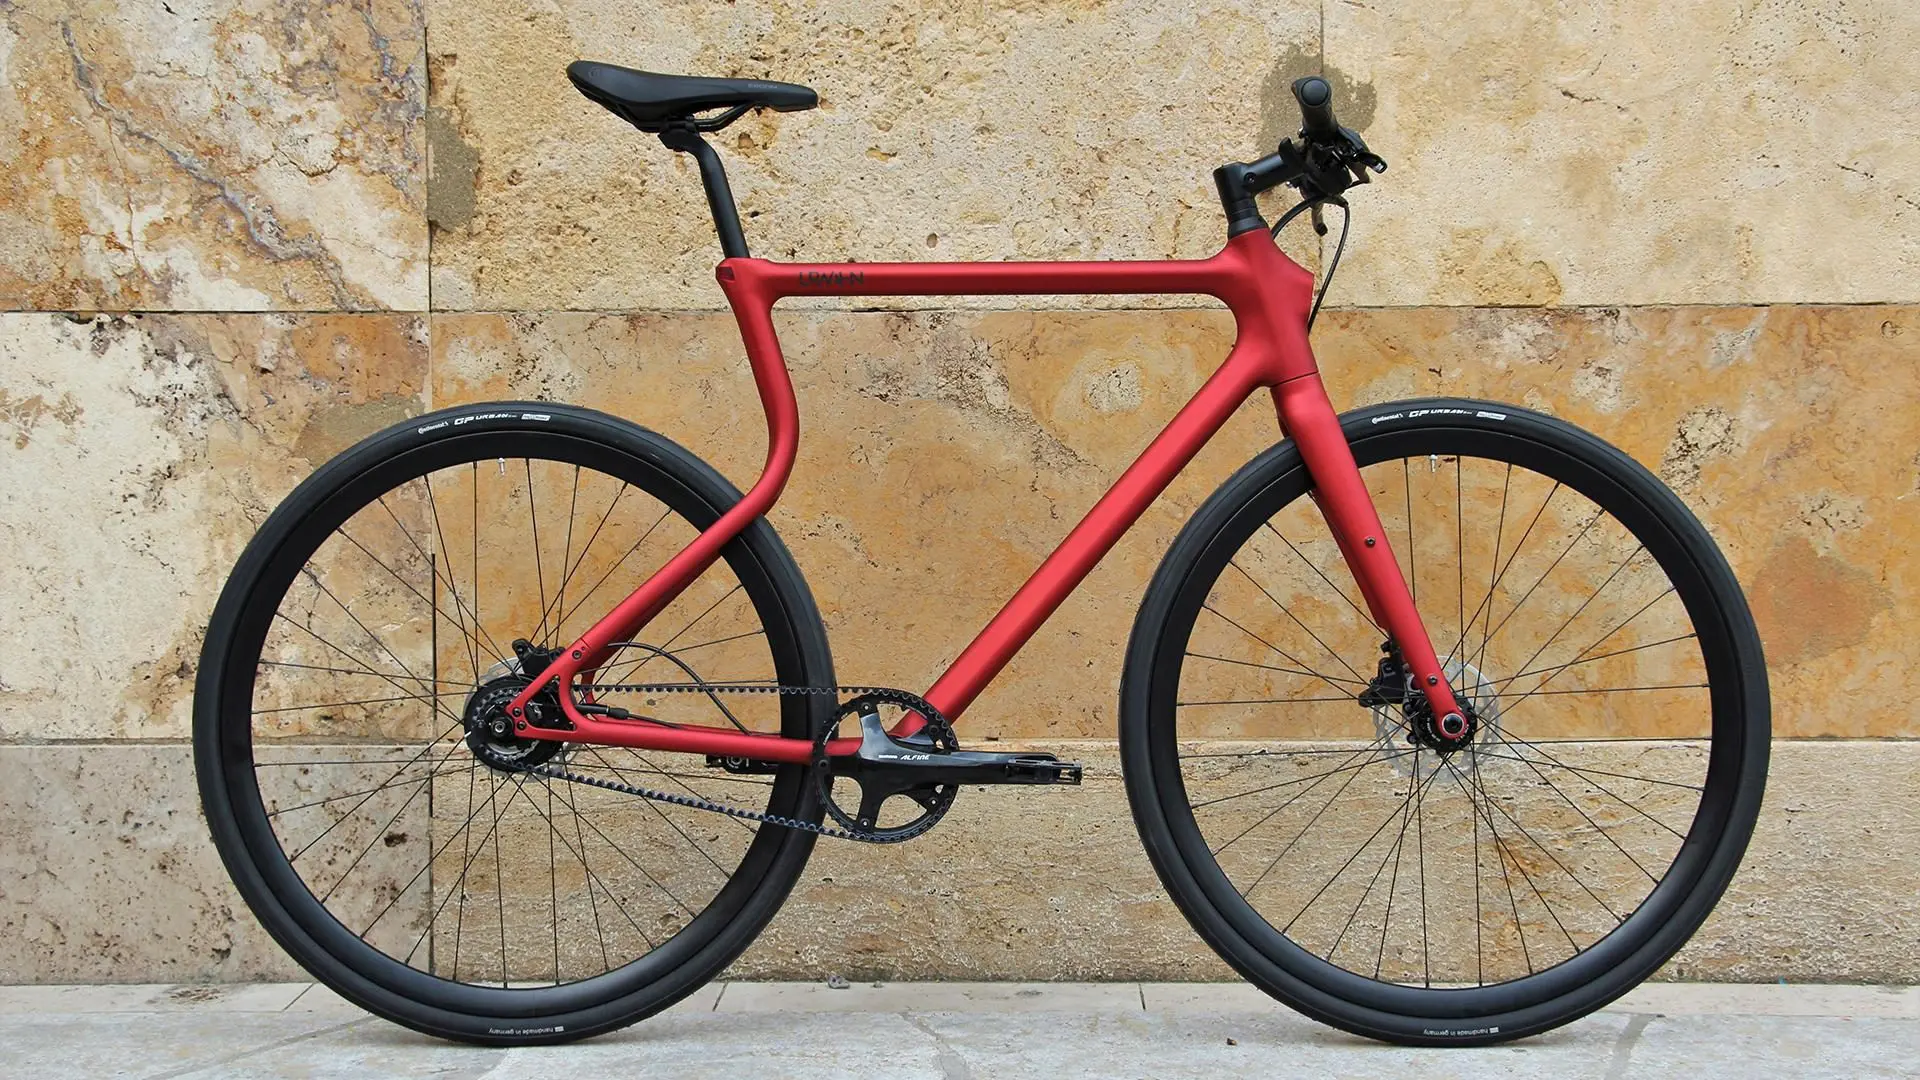 Stadtfuchs Bikes are designed for the urban lifestyle - Interview with Sebastian Meinecke